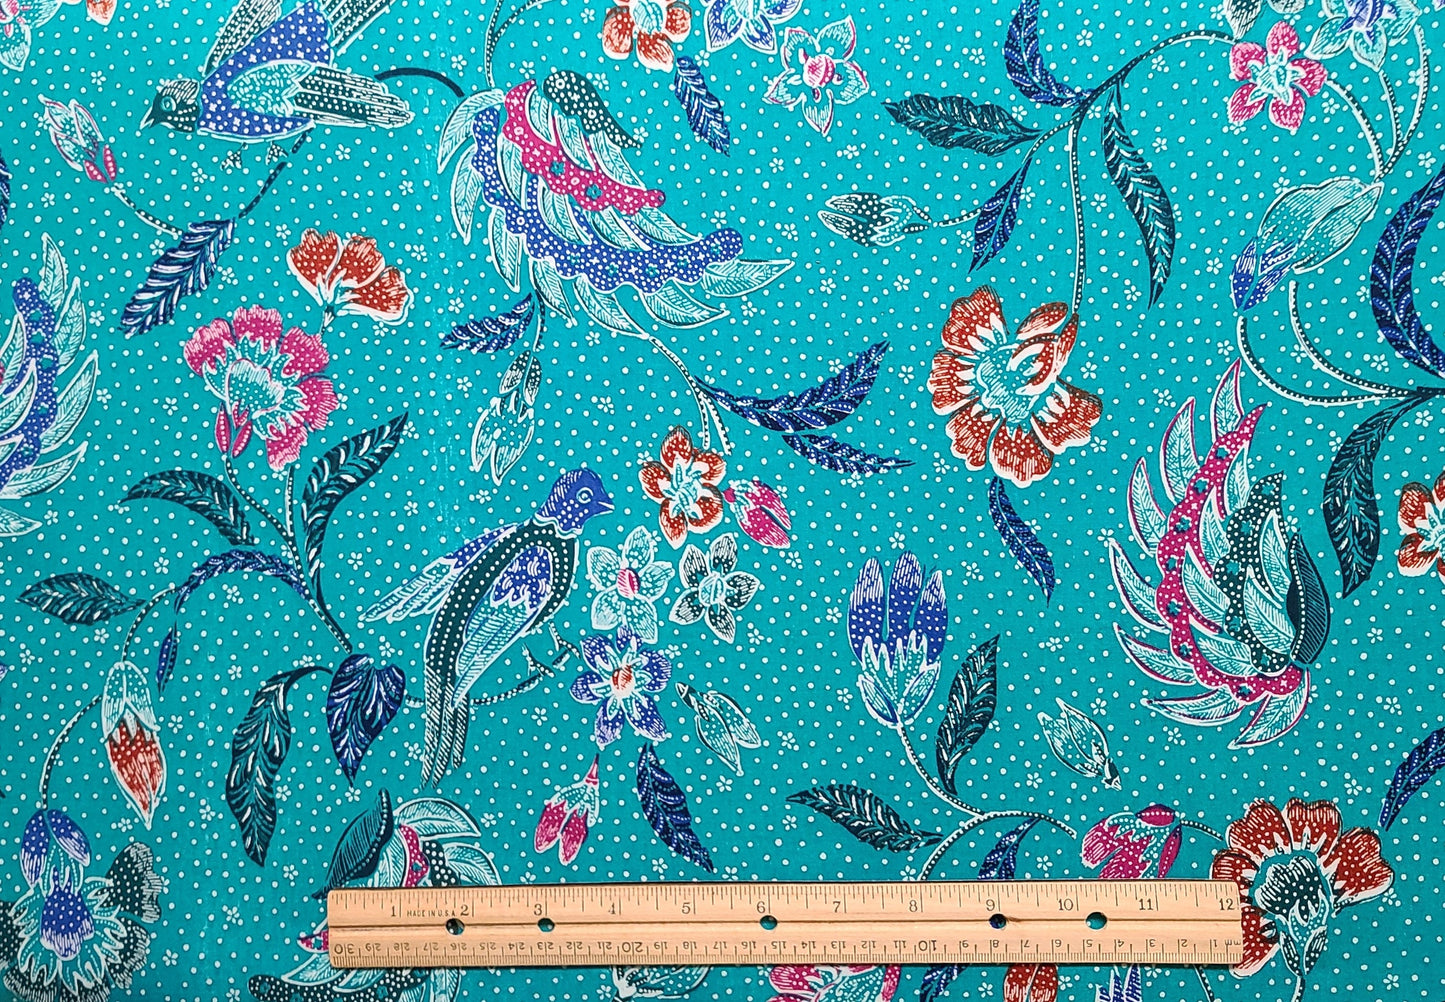 Teal Fabric / Purple, Rust, Black, Raspberry Bird and Flower Print / White Pin Dot and Flower Background